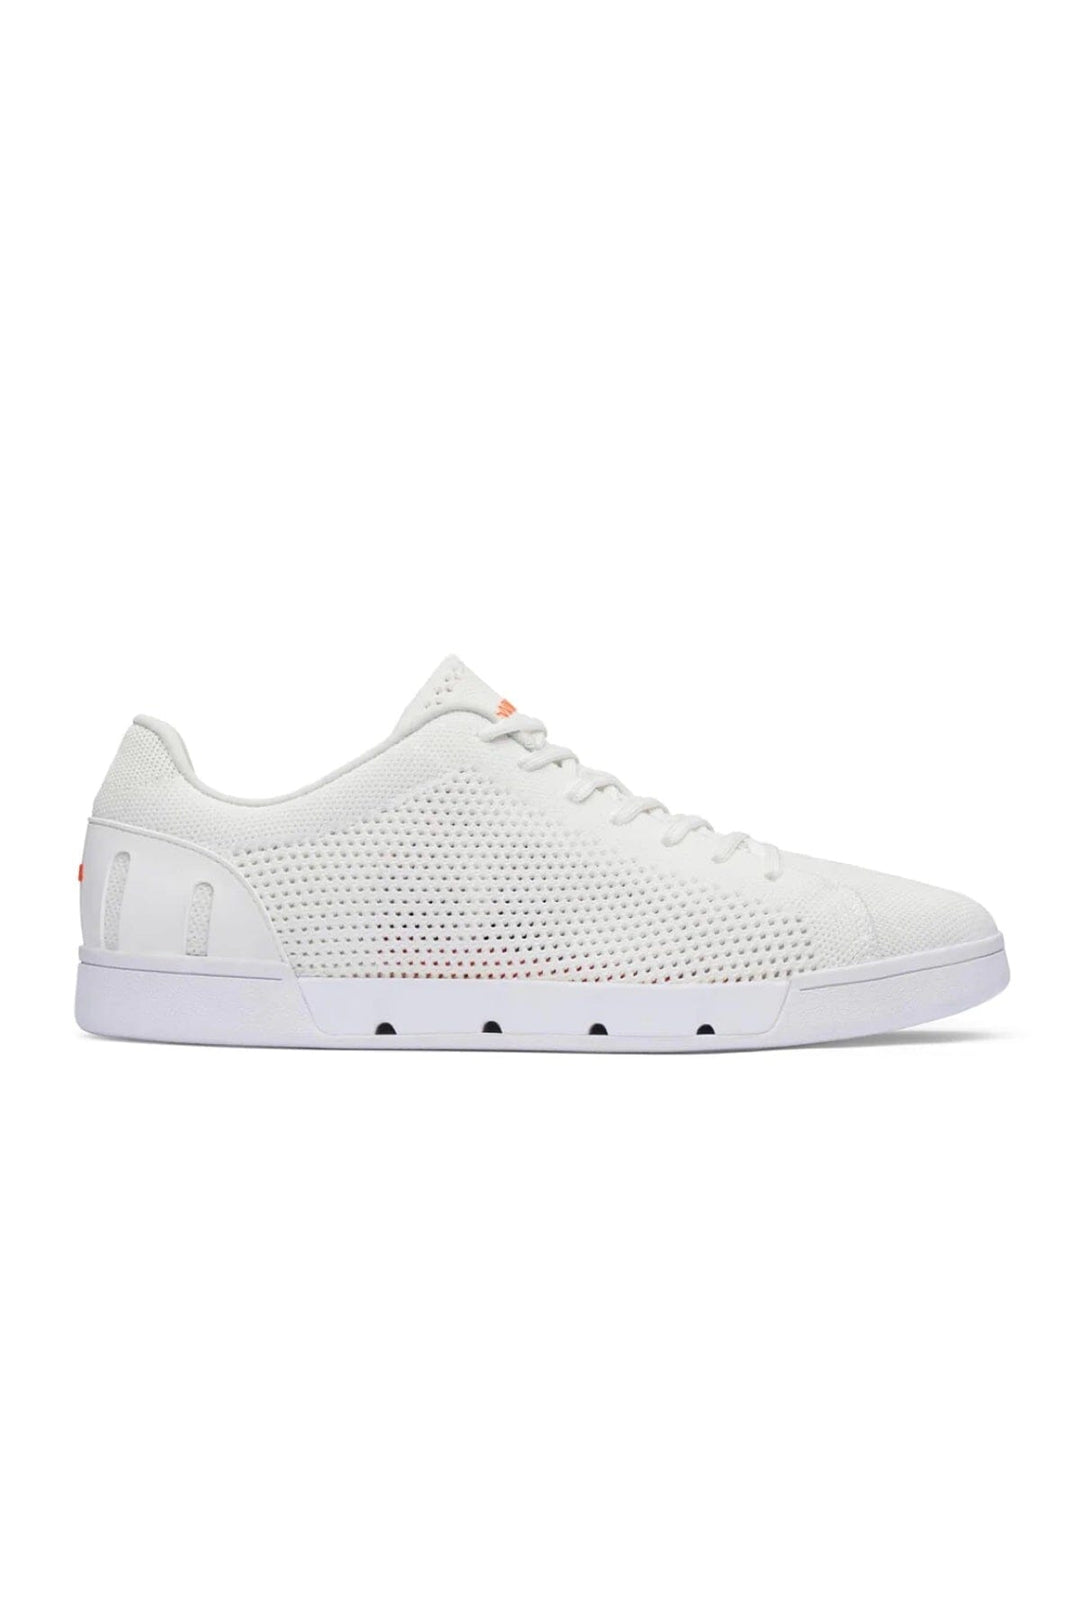 Chaussures tricot Breeze Tennis Swims 